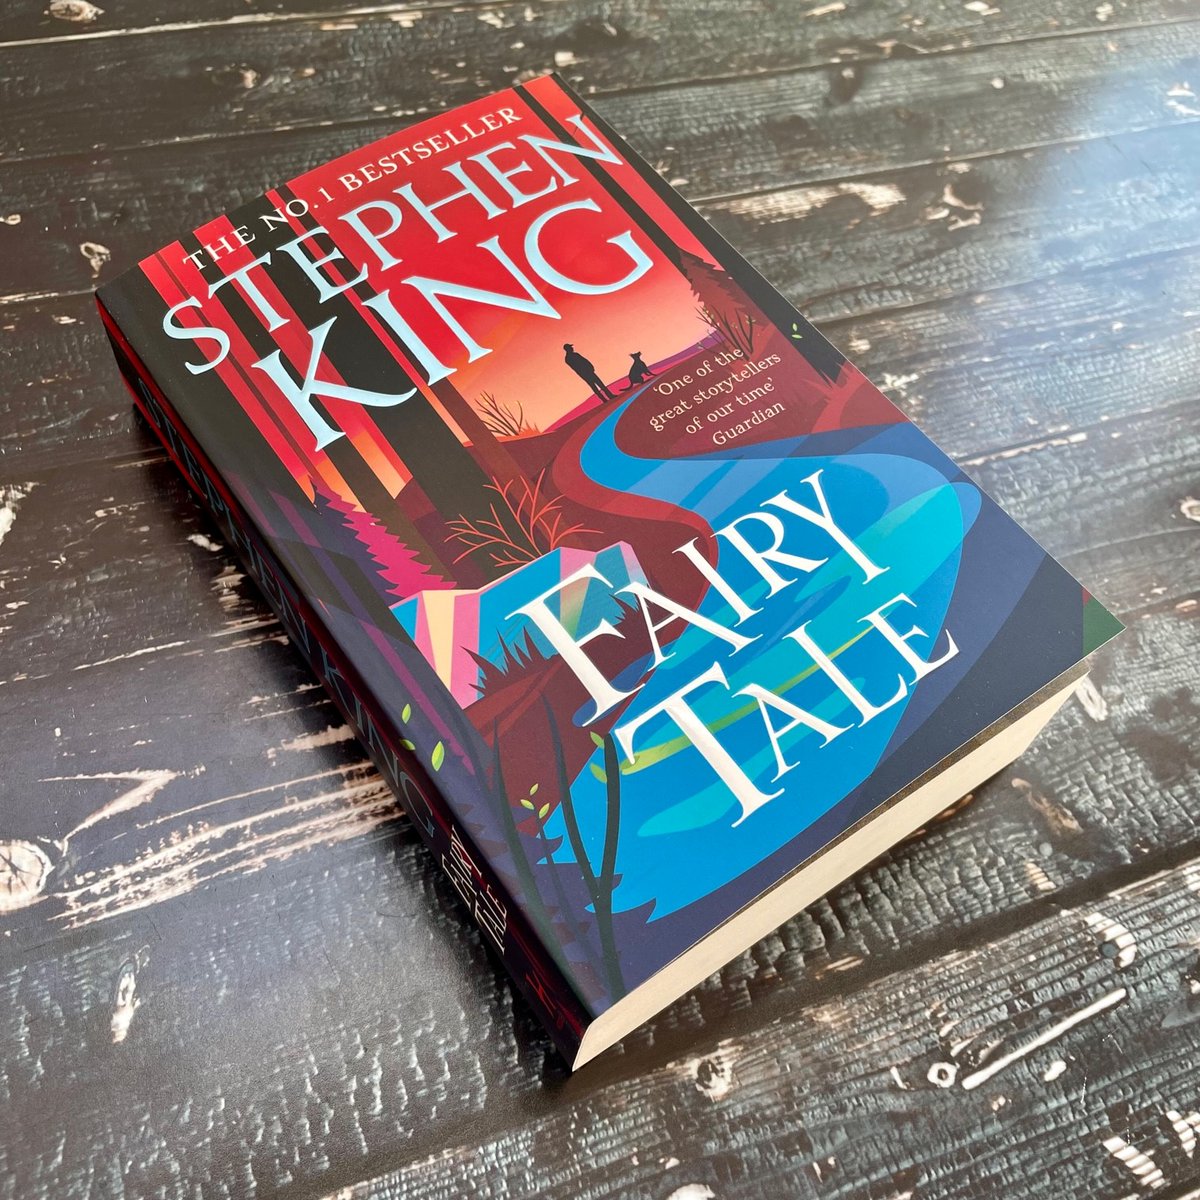 'Vintage, timeless King, a transporting, terrifying treat' - Guardian
'A Once-Upon-A-Time tale like no other' - Daily Mail

@StephenKing's No.1 bestseller Fairy Tale is out today in paperback.

Grab the @waterstones exclusive edition with extra content: fal.cn/3yUM7